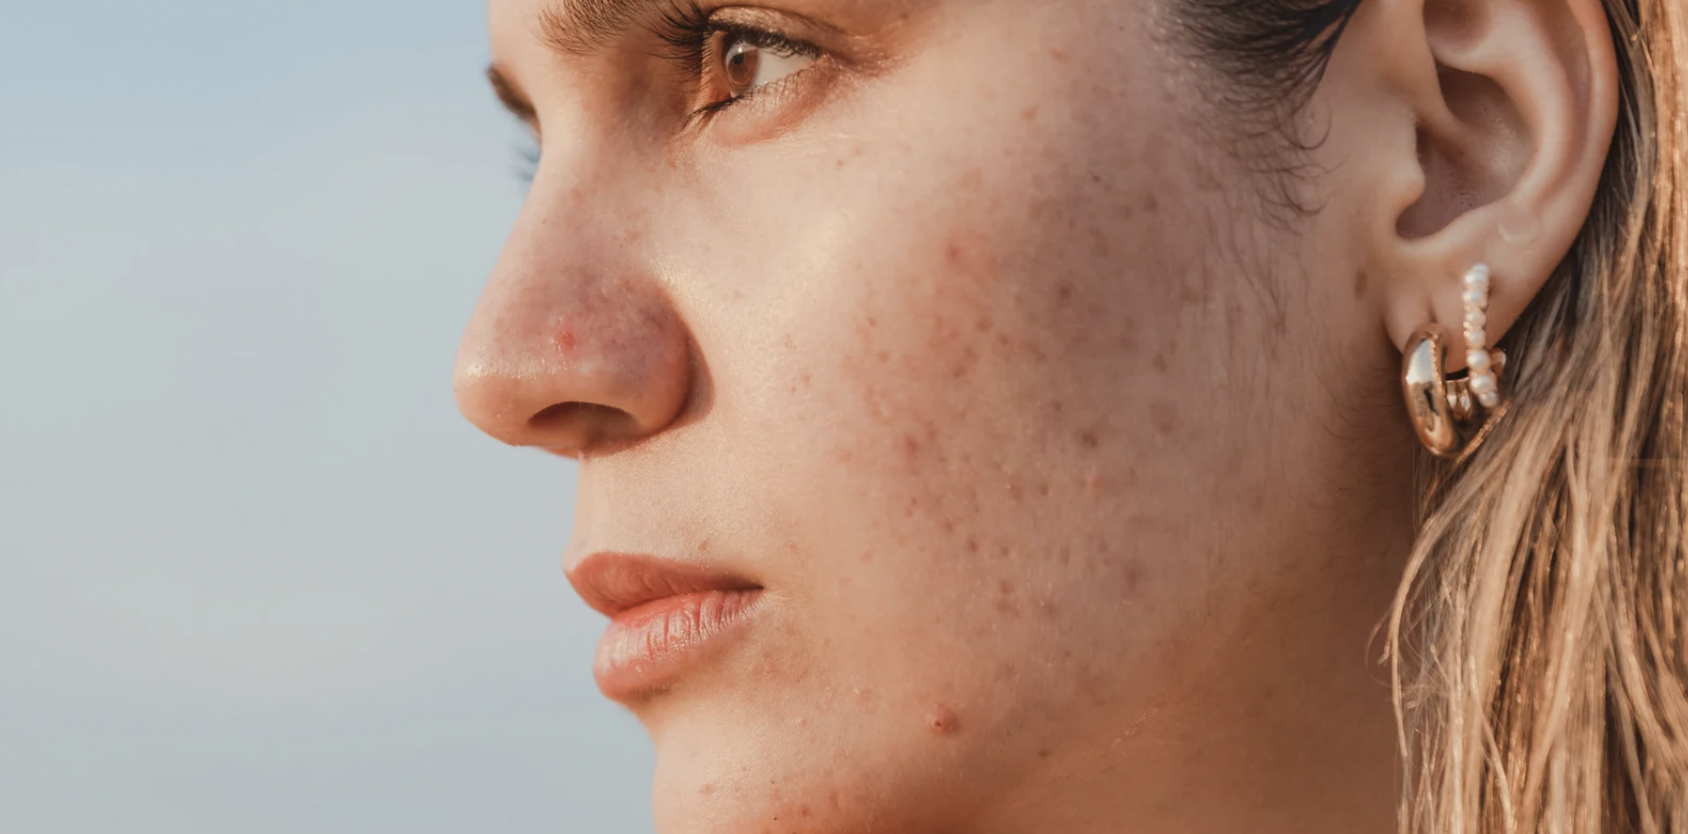 Acne Scars Specialist